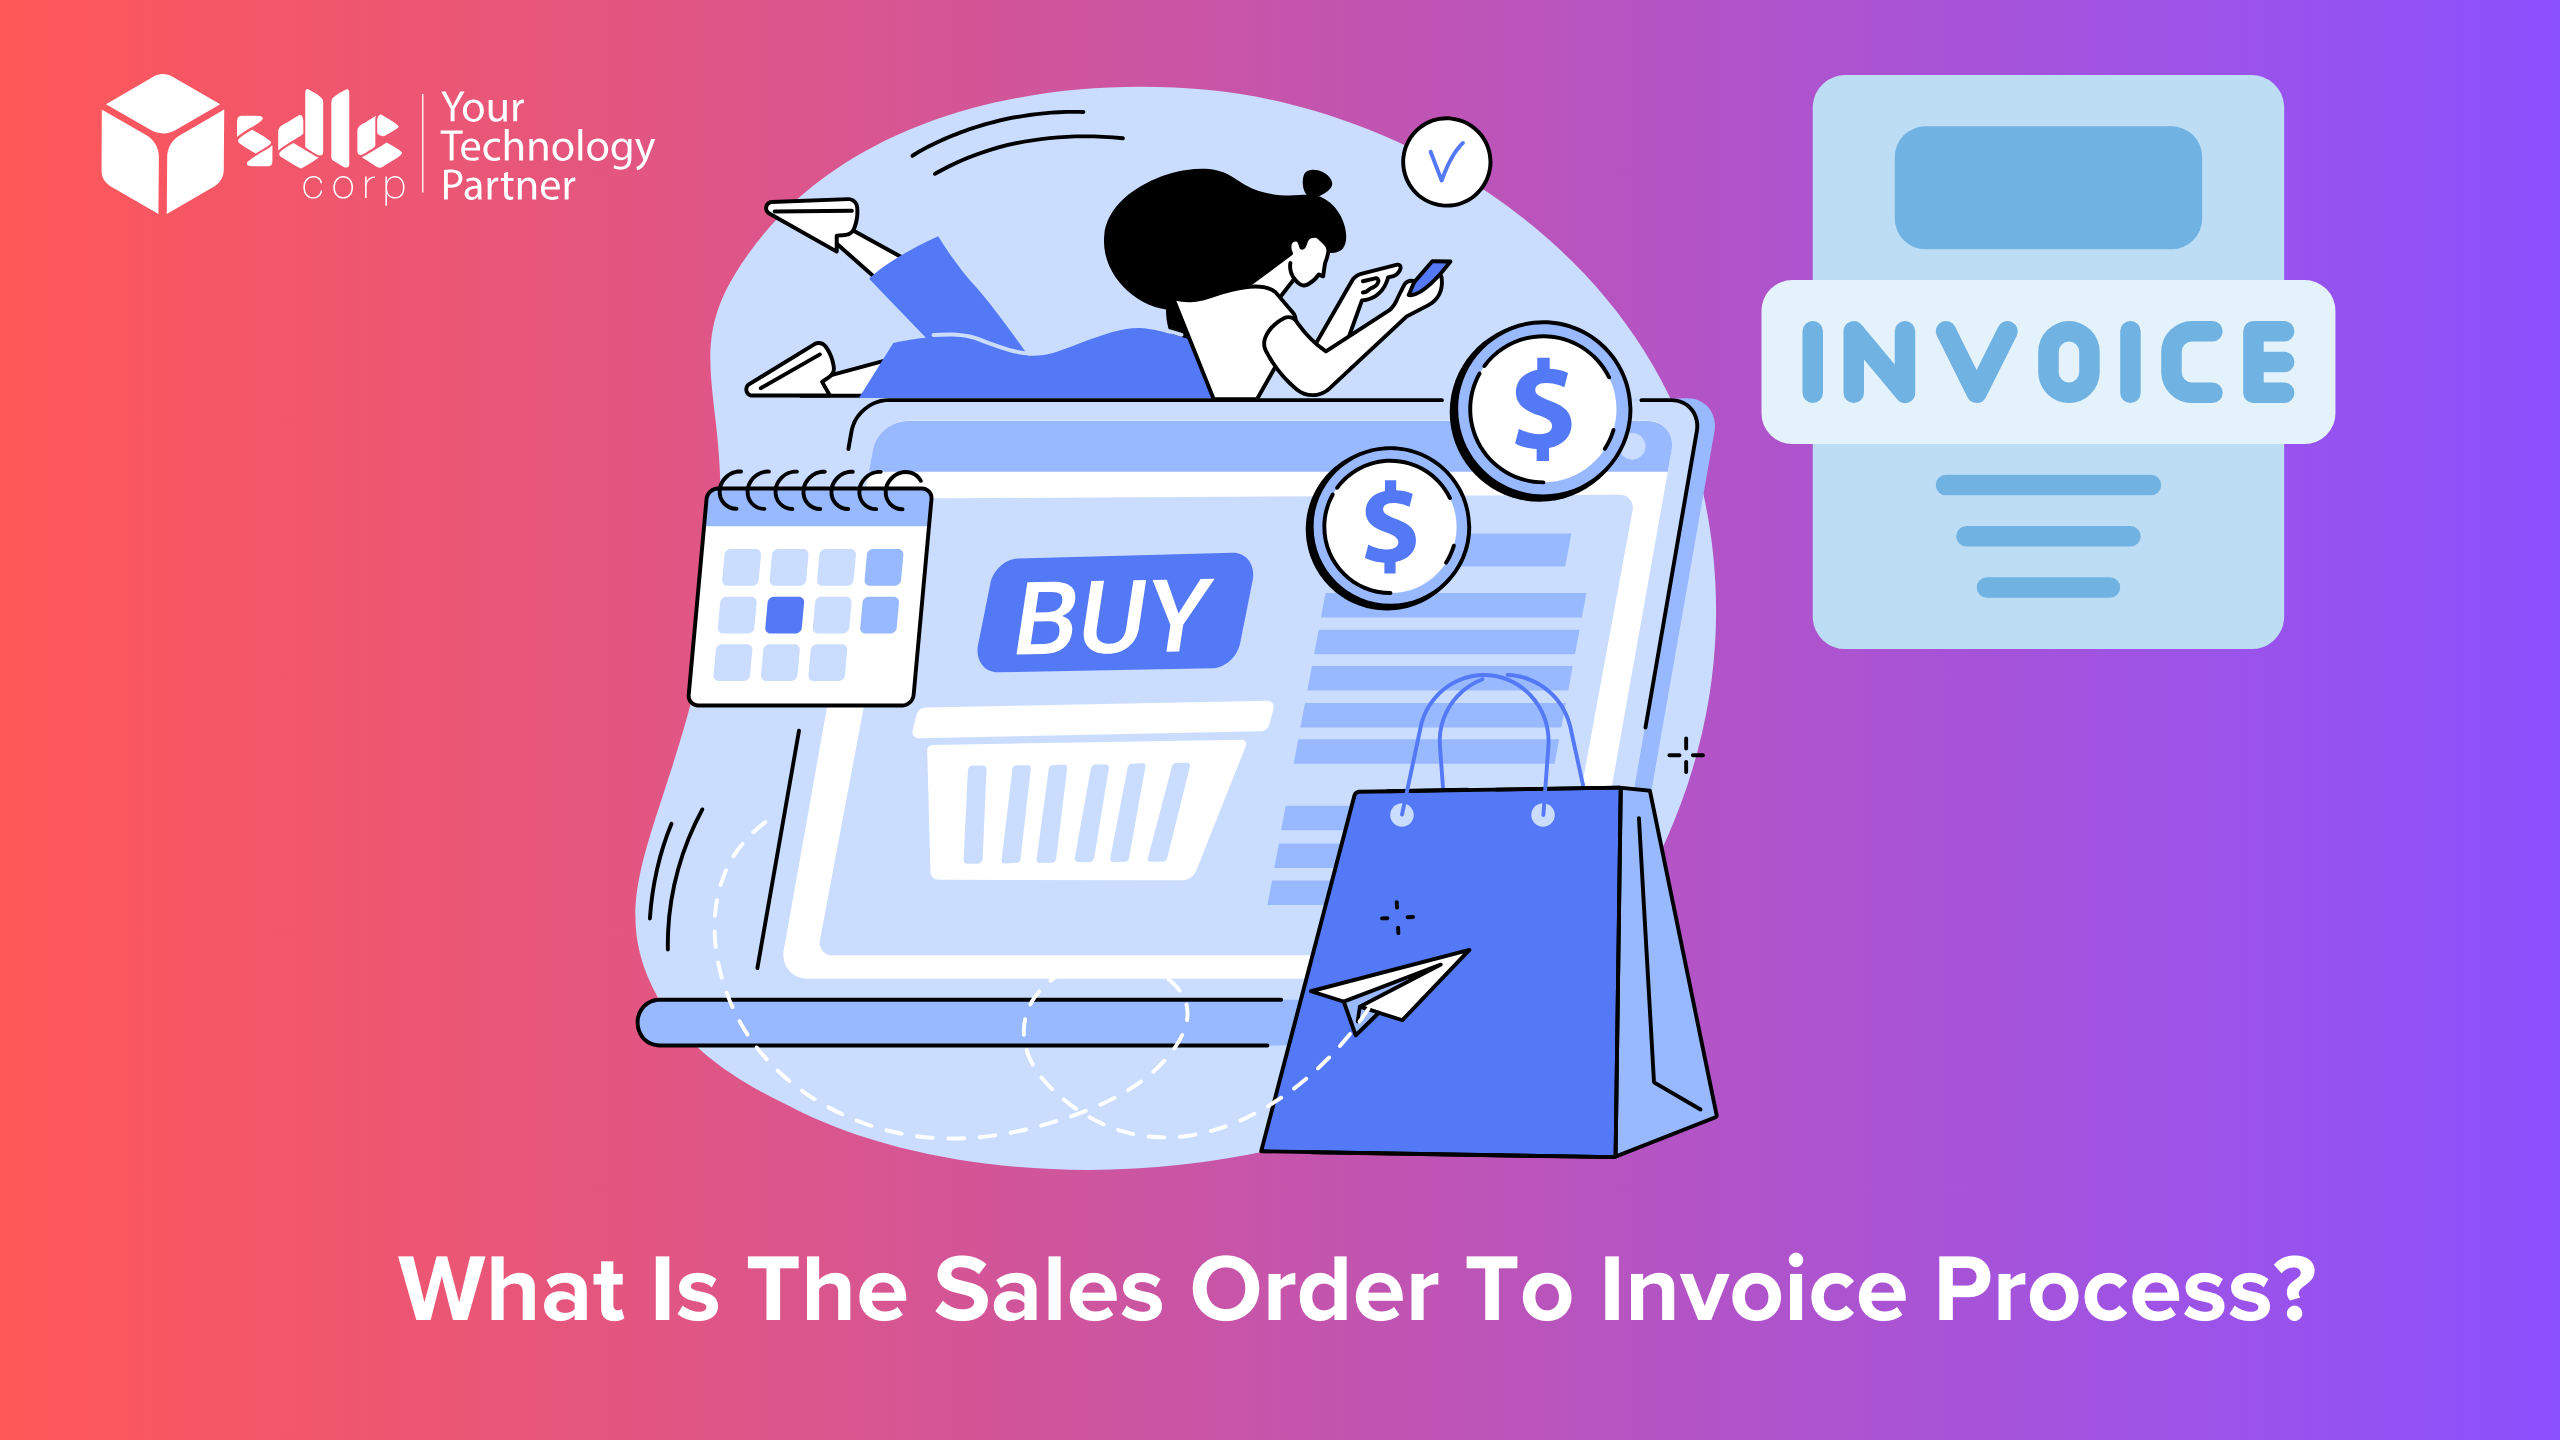 What is the sales order to invoice process